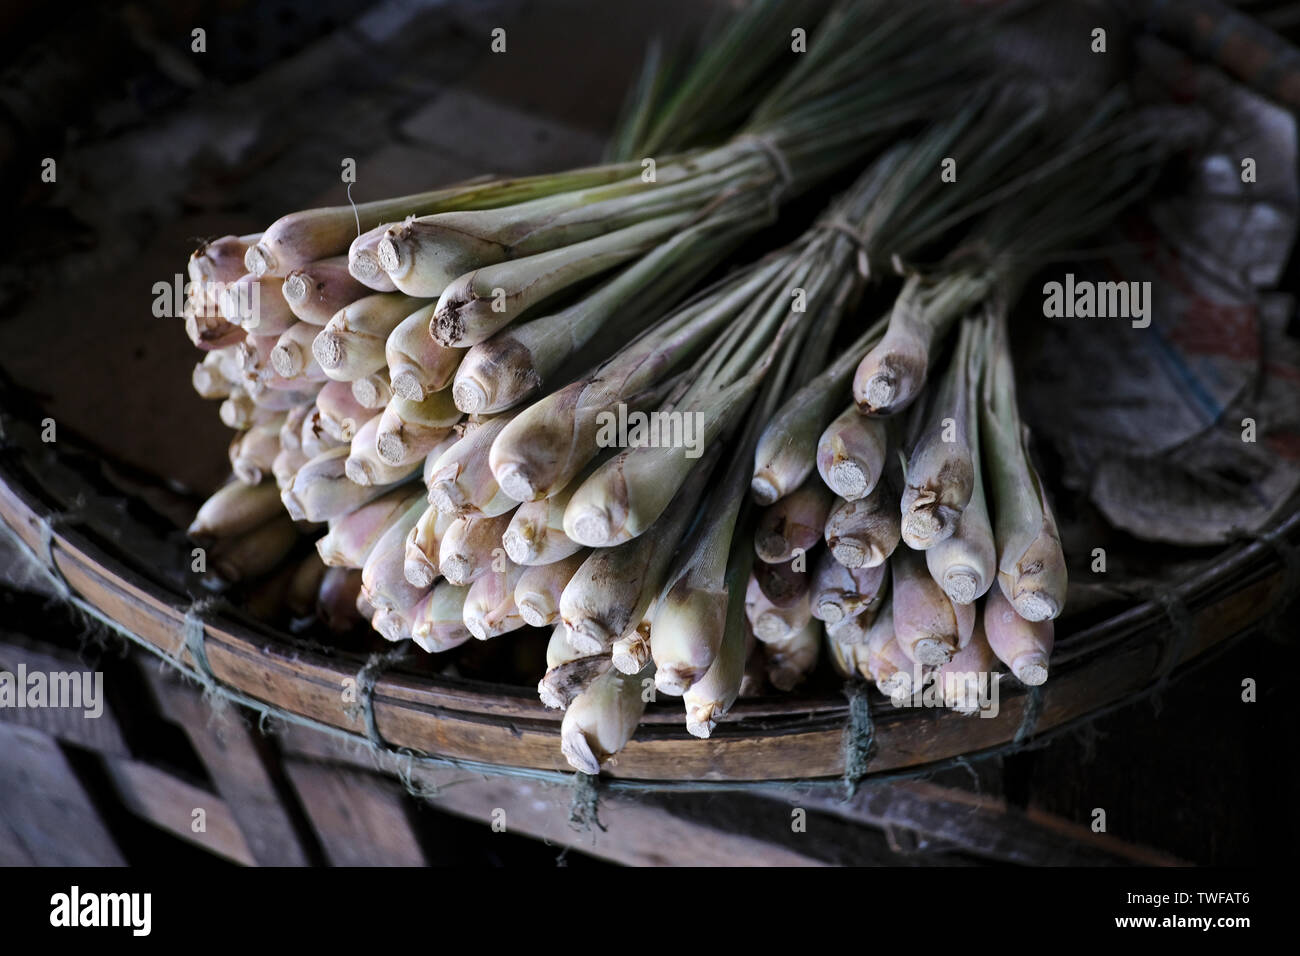 Freshly picked vegetables at a market in Yangon. Stock Photo